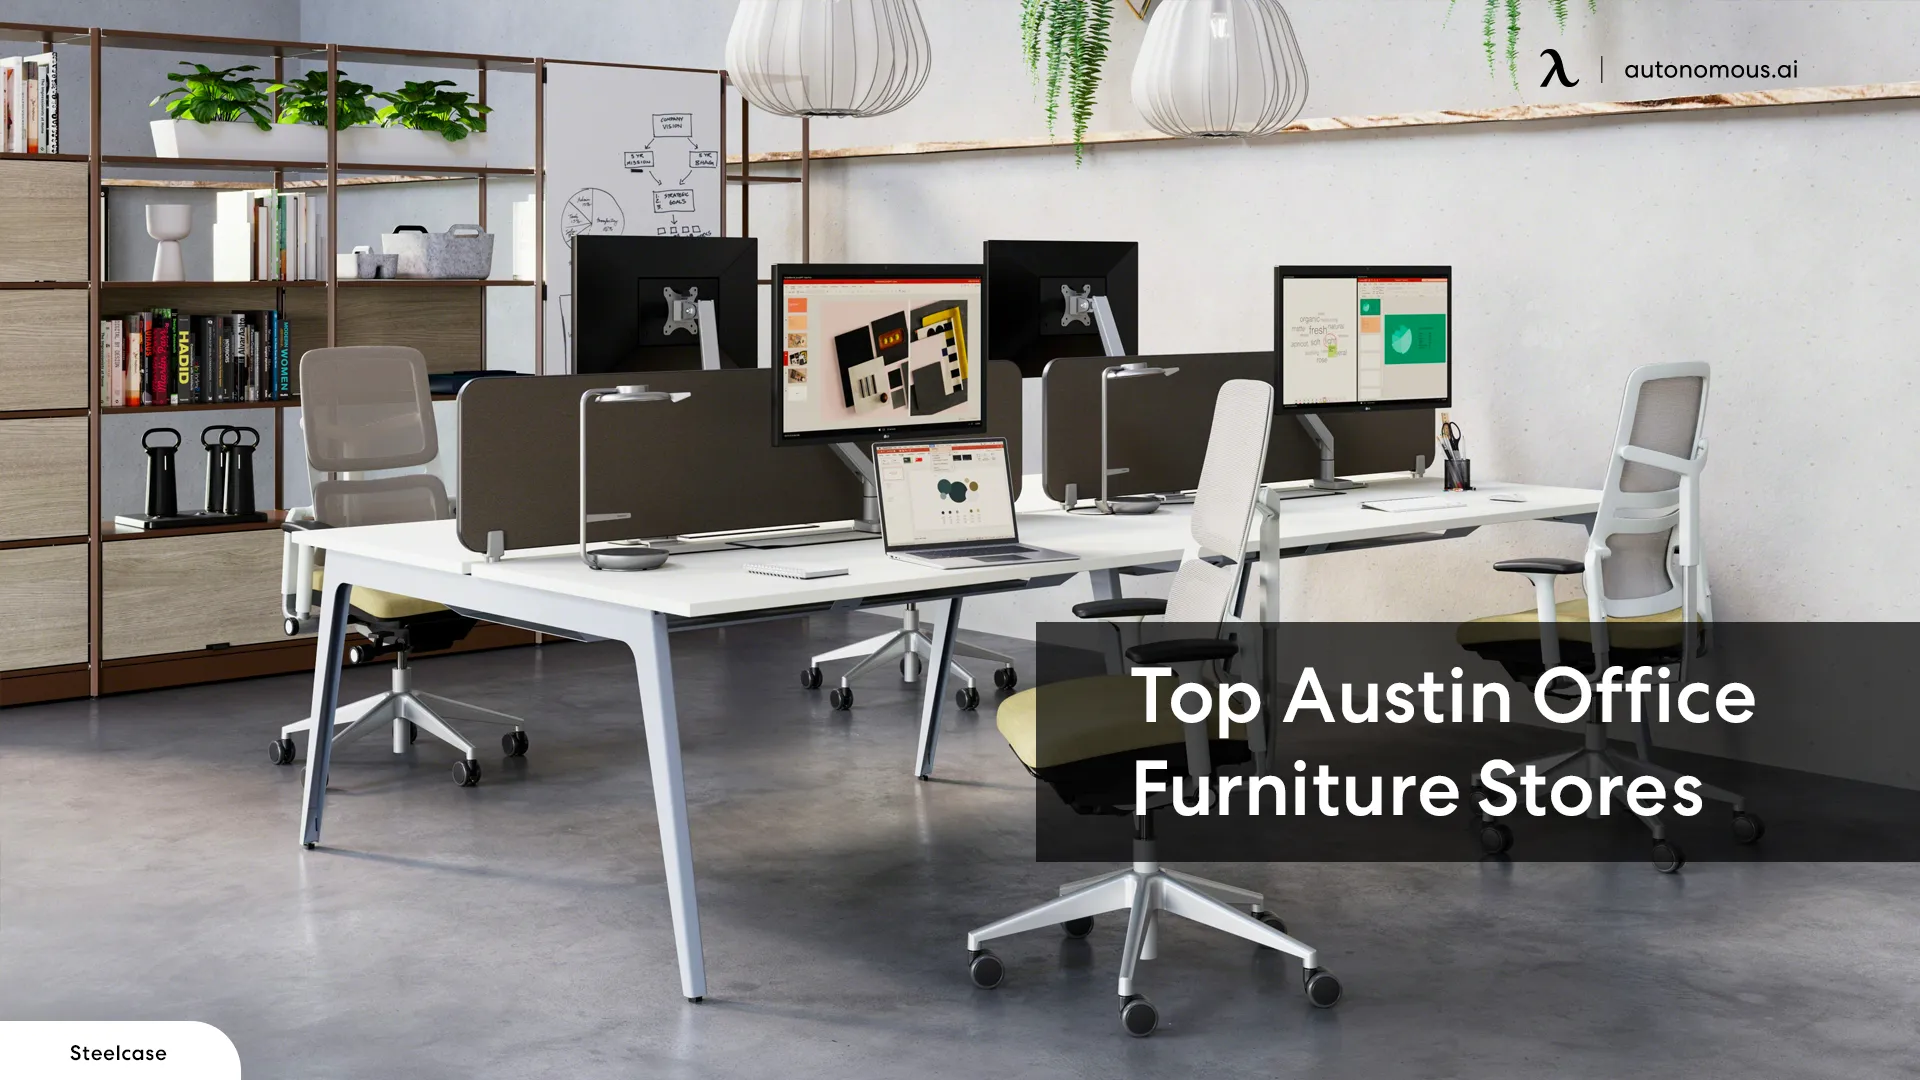 Top Austin Office Furniture Destinations for Style & Functionality